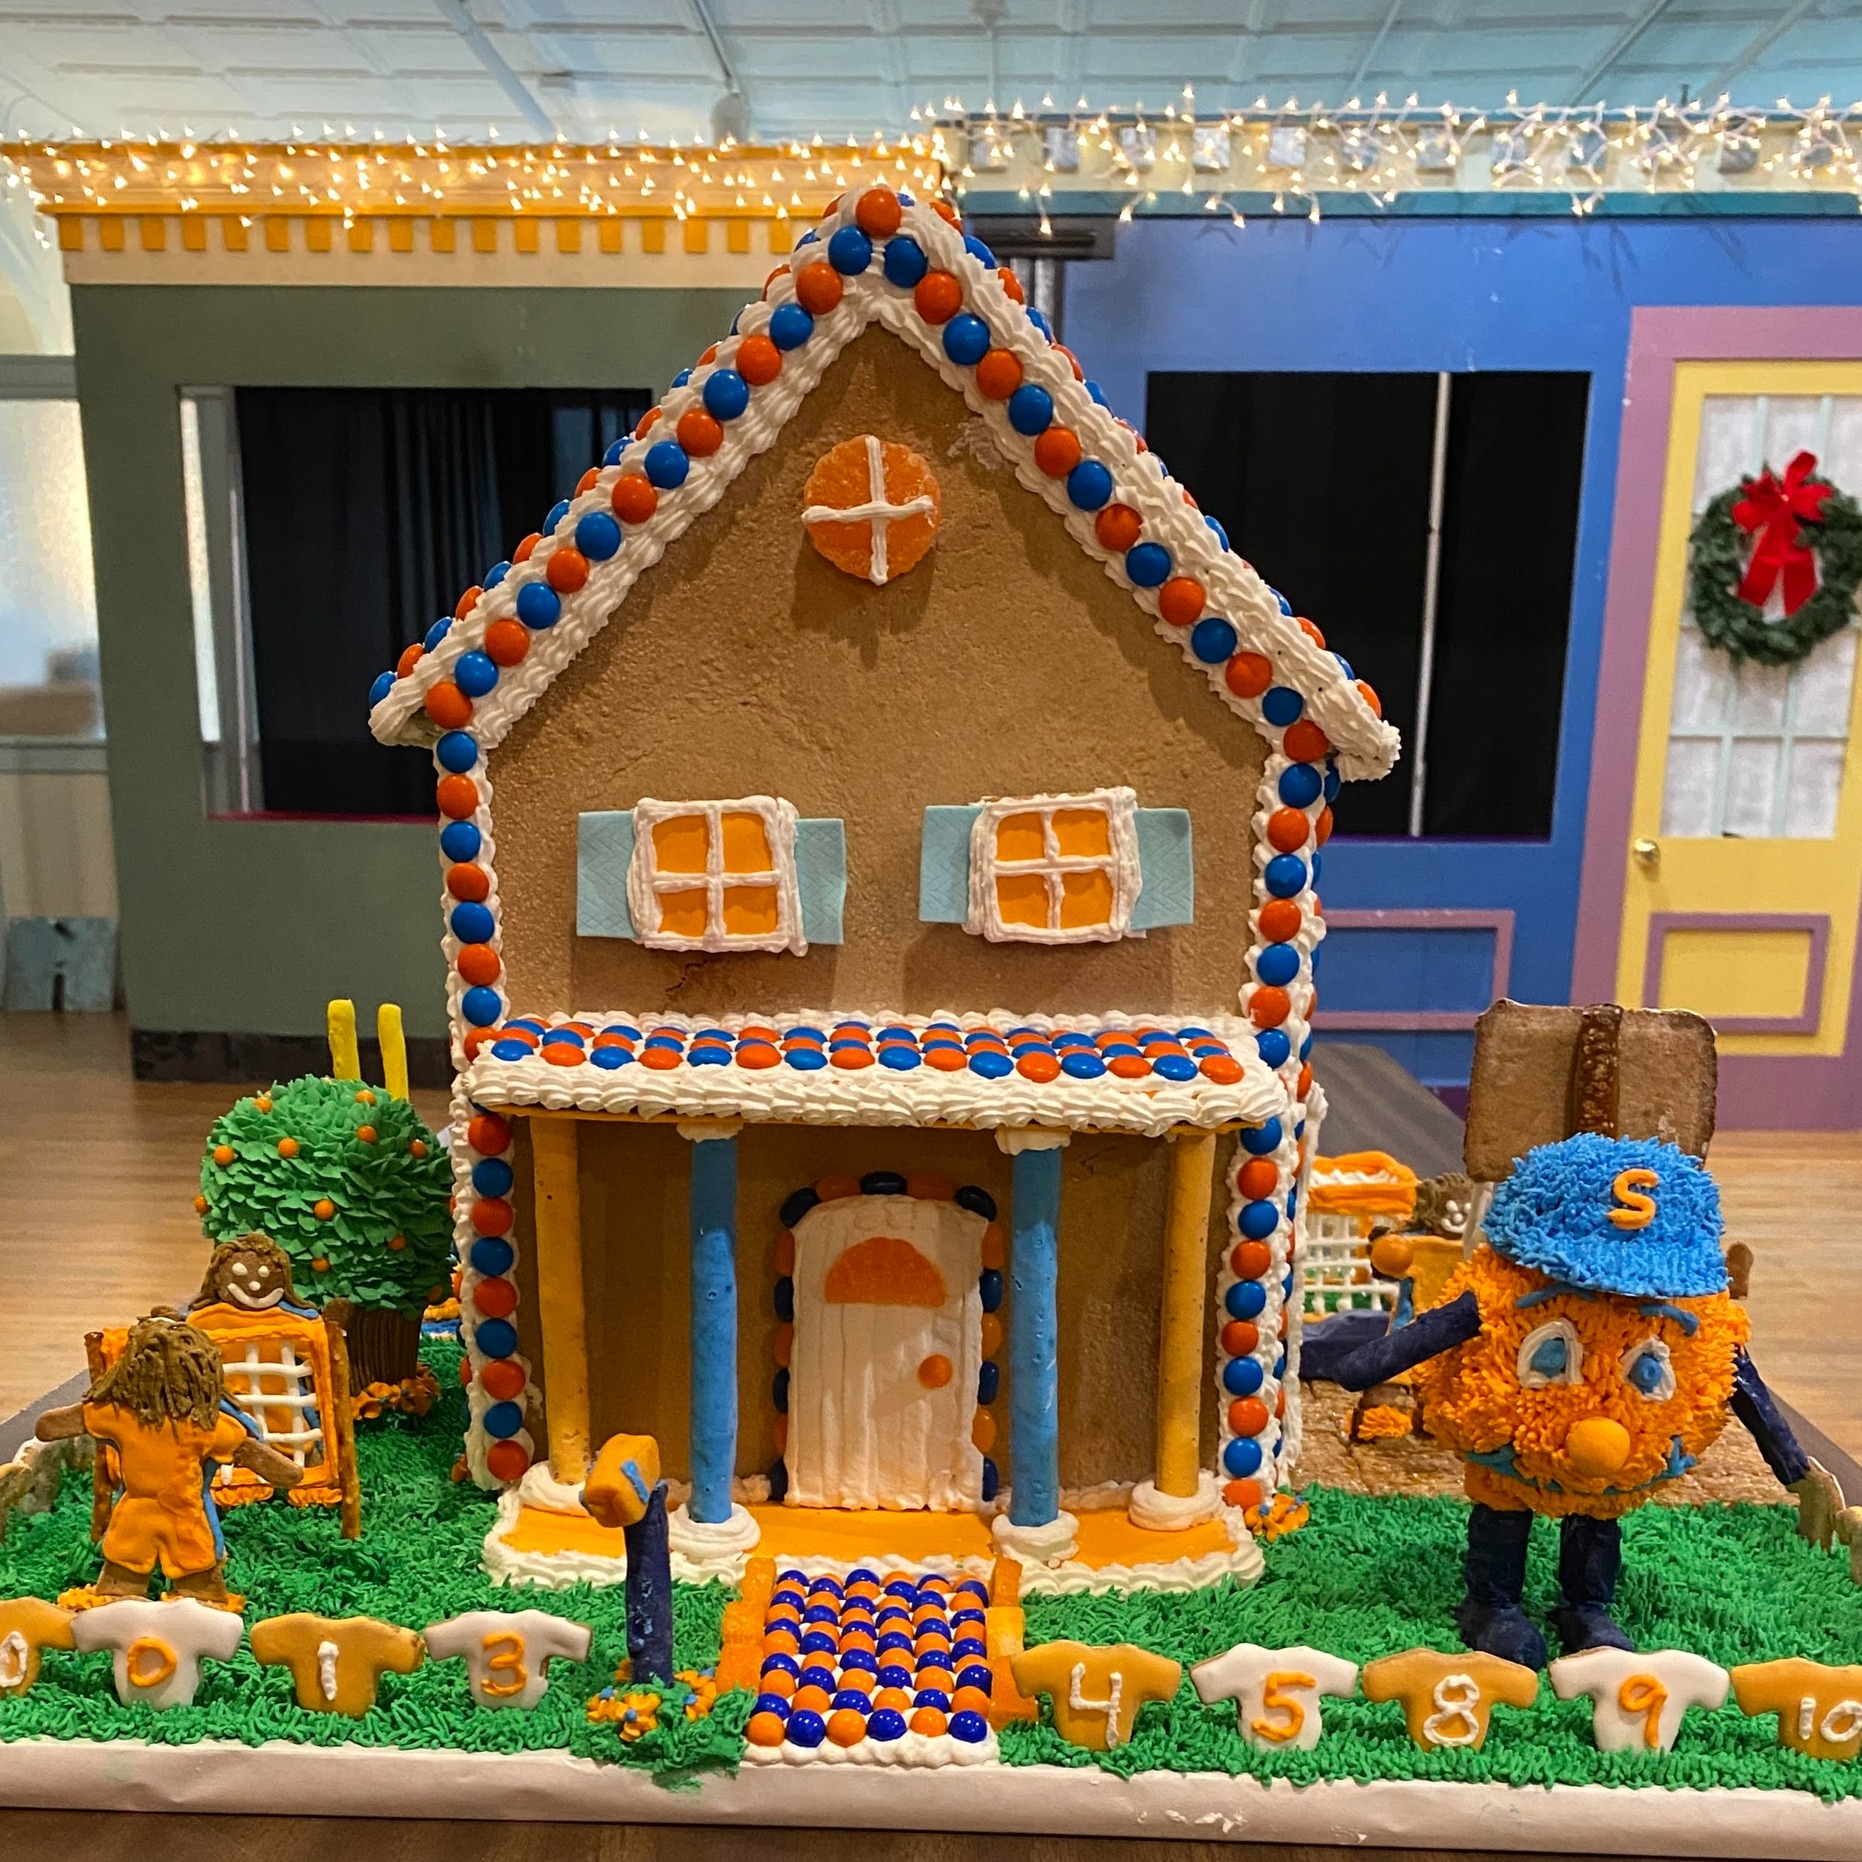 Gingerbread house decorated with orange and blue accents with an otto the orange in the front yard.